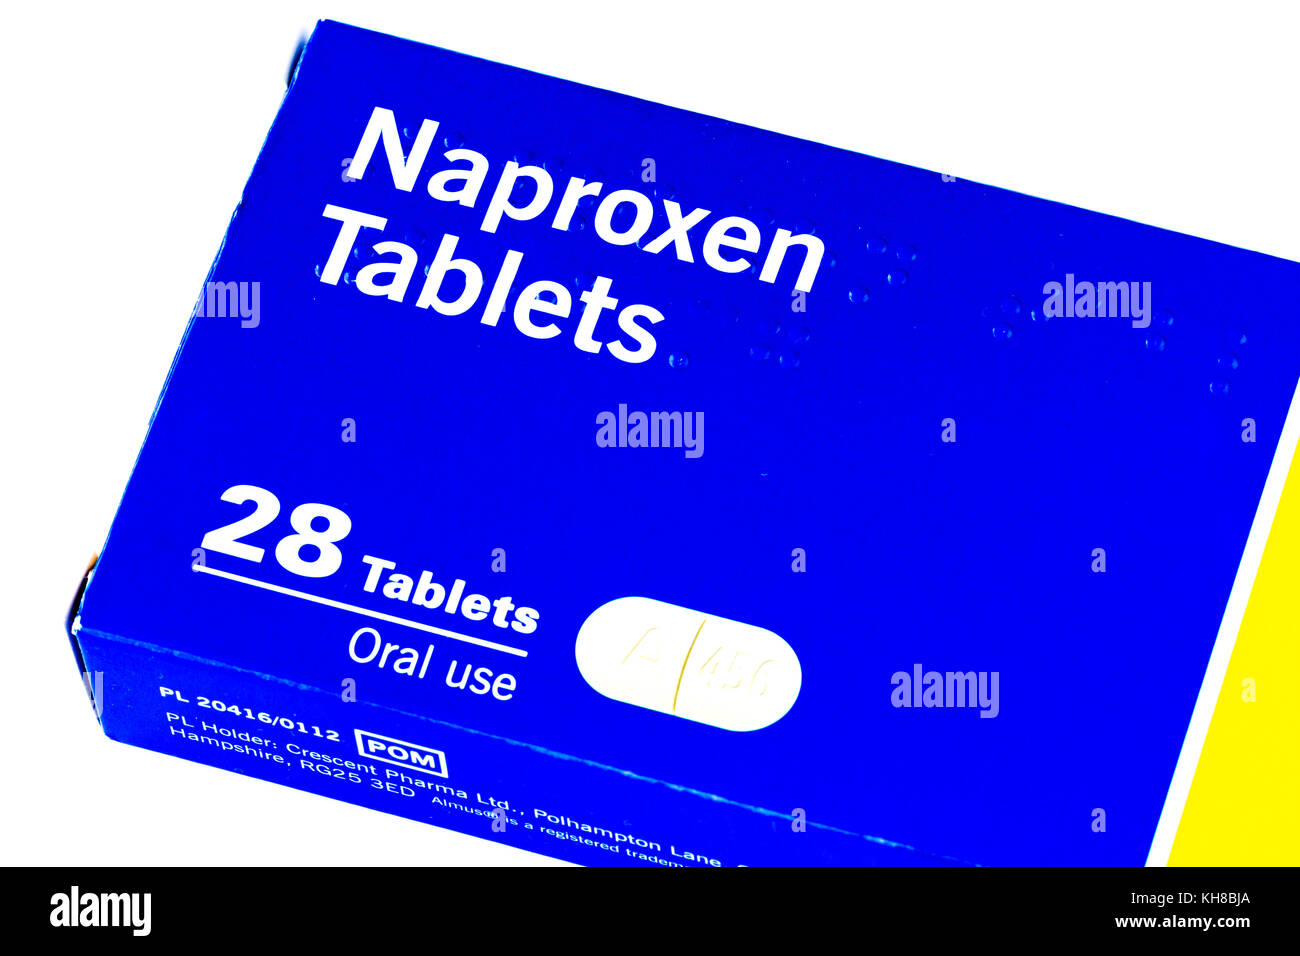 Photograph of Close up of a box of Naproxen tablets, an anti-inflammatory drug used to relieve pain & inflammation Stock Photo